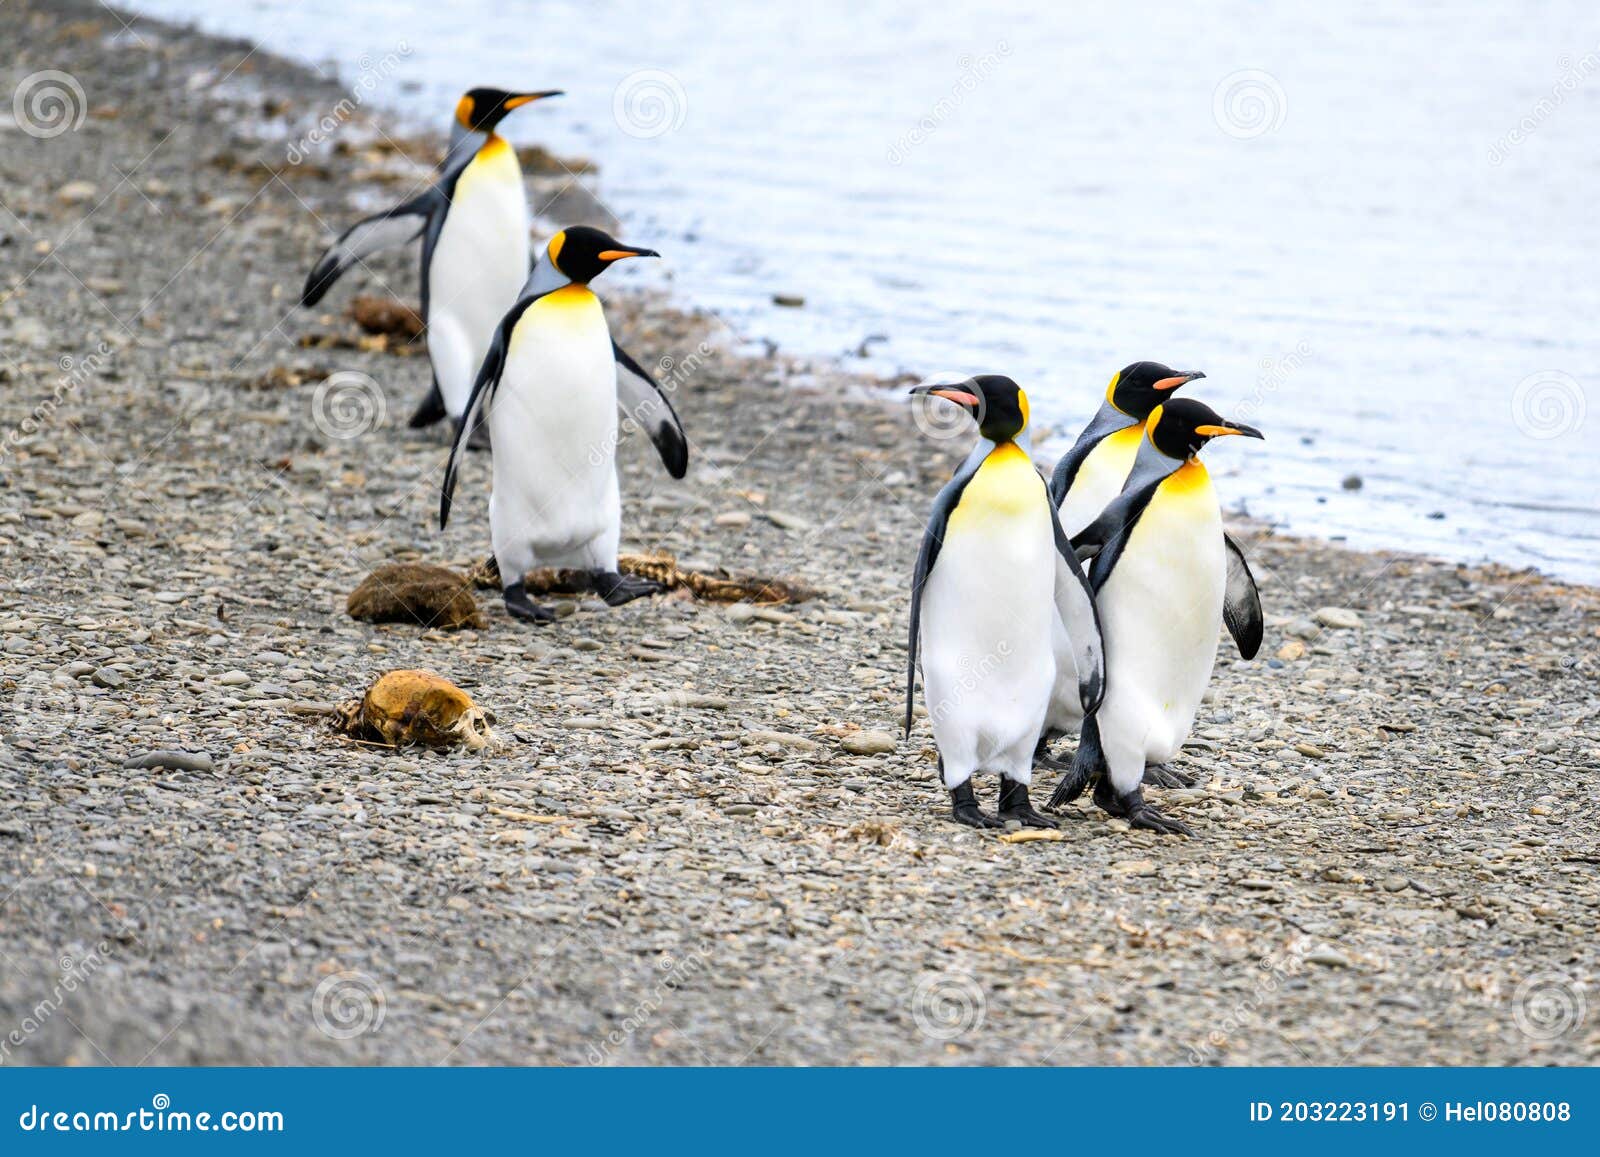 king penguins - aptendytes patagonica, group of penguins walking on beach, gold harbour, south georgia